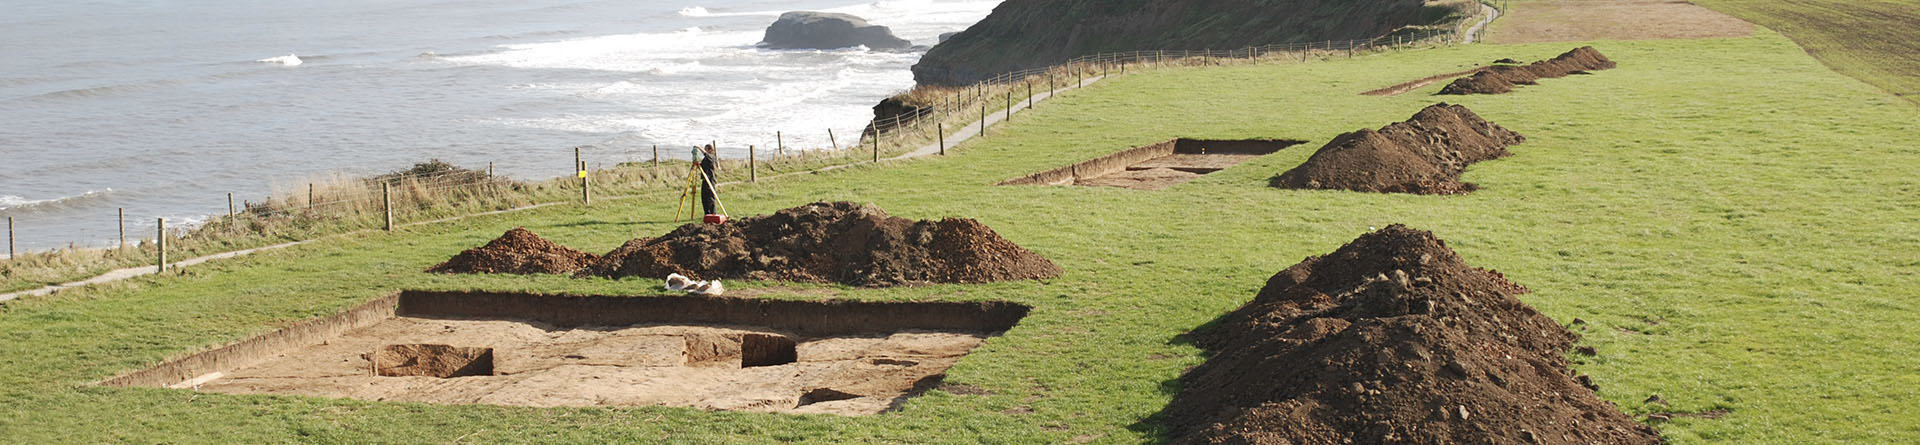 Piles of soil next to excavated trenches on the cliffs edge with the sea in the background